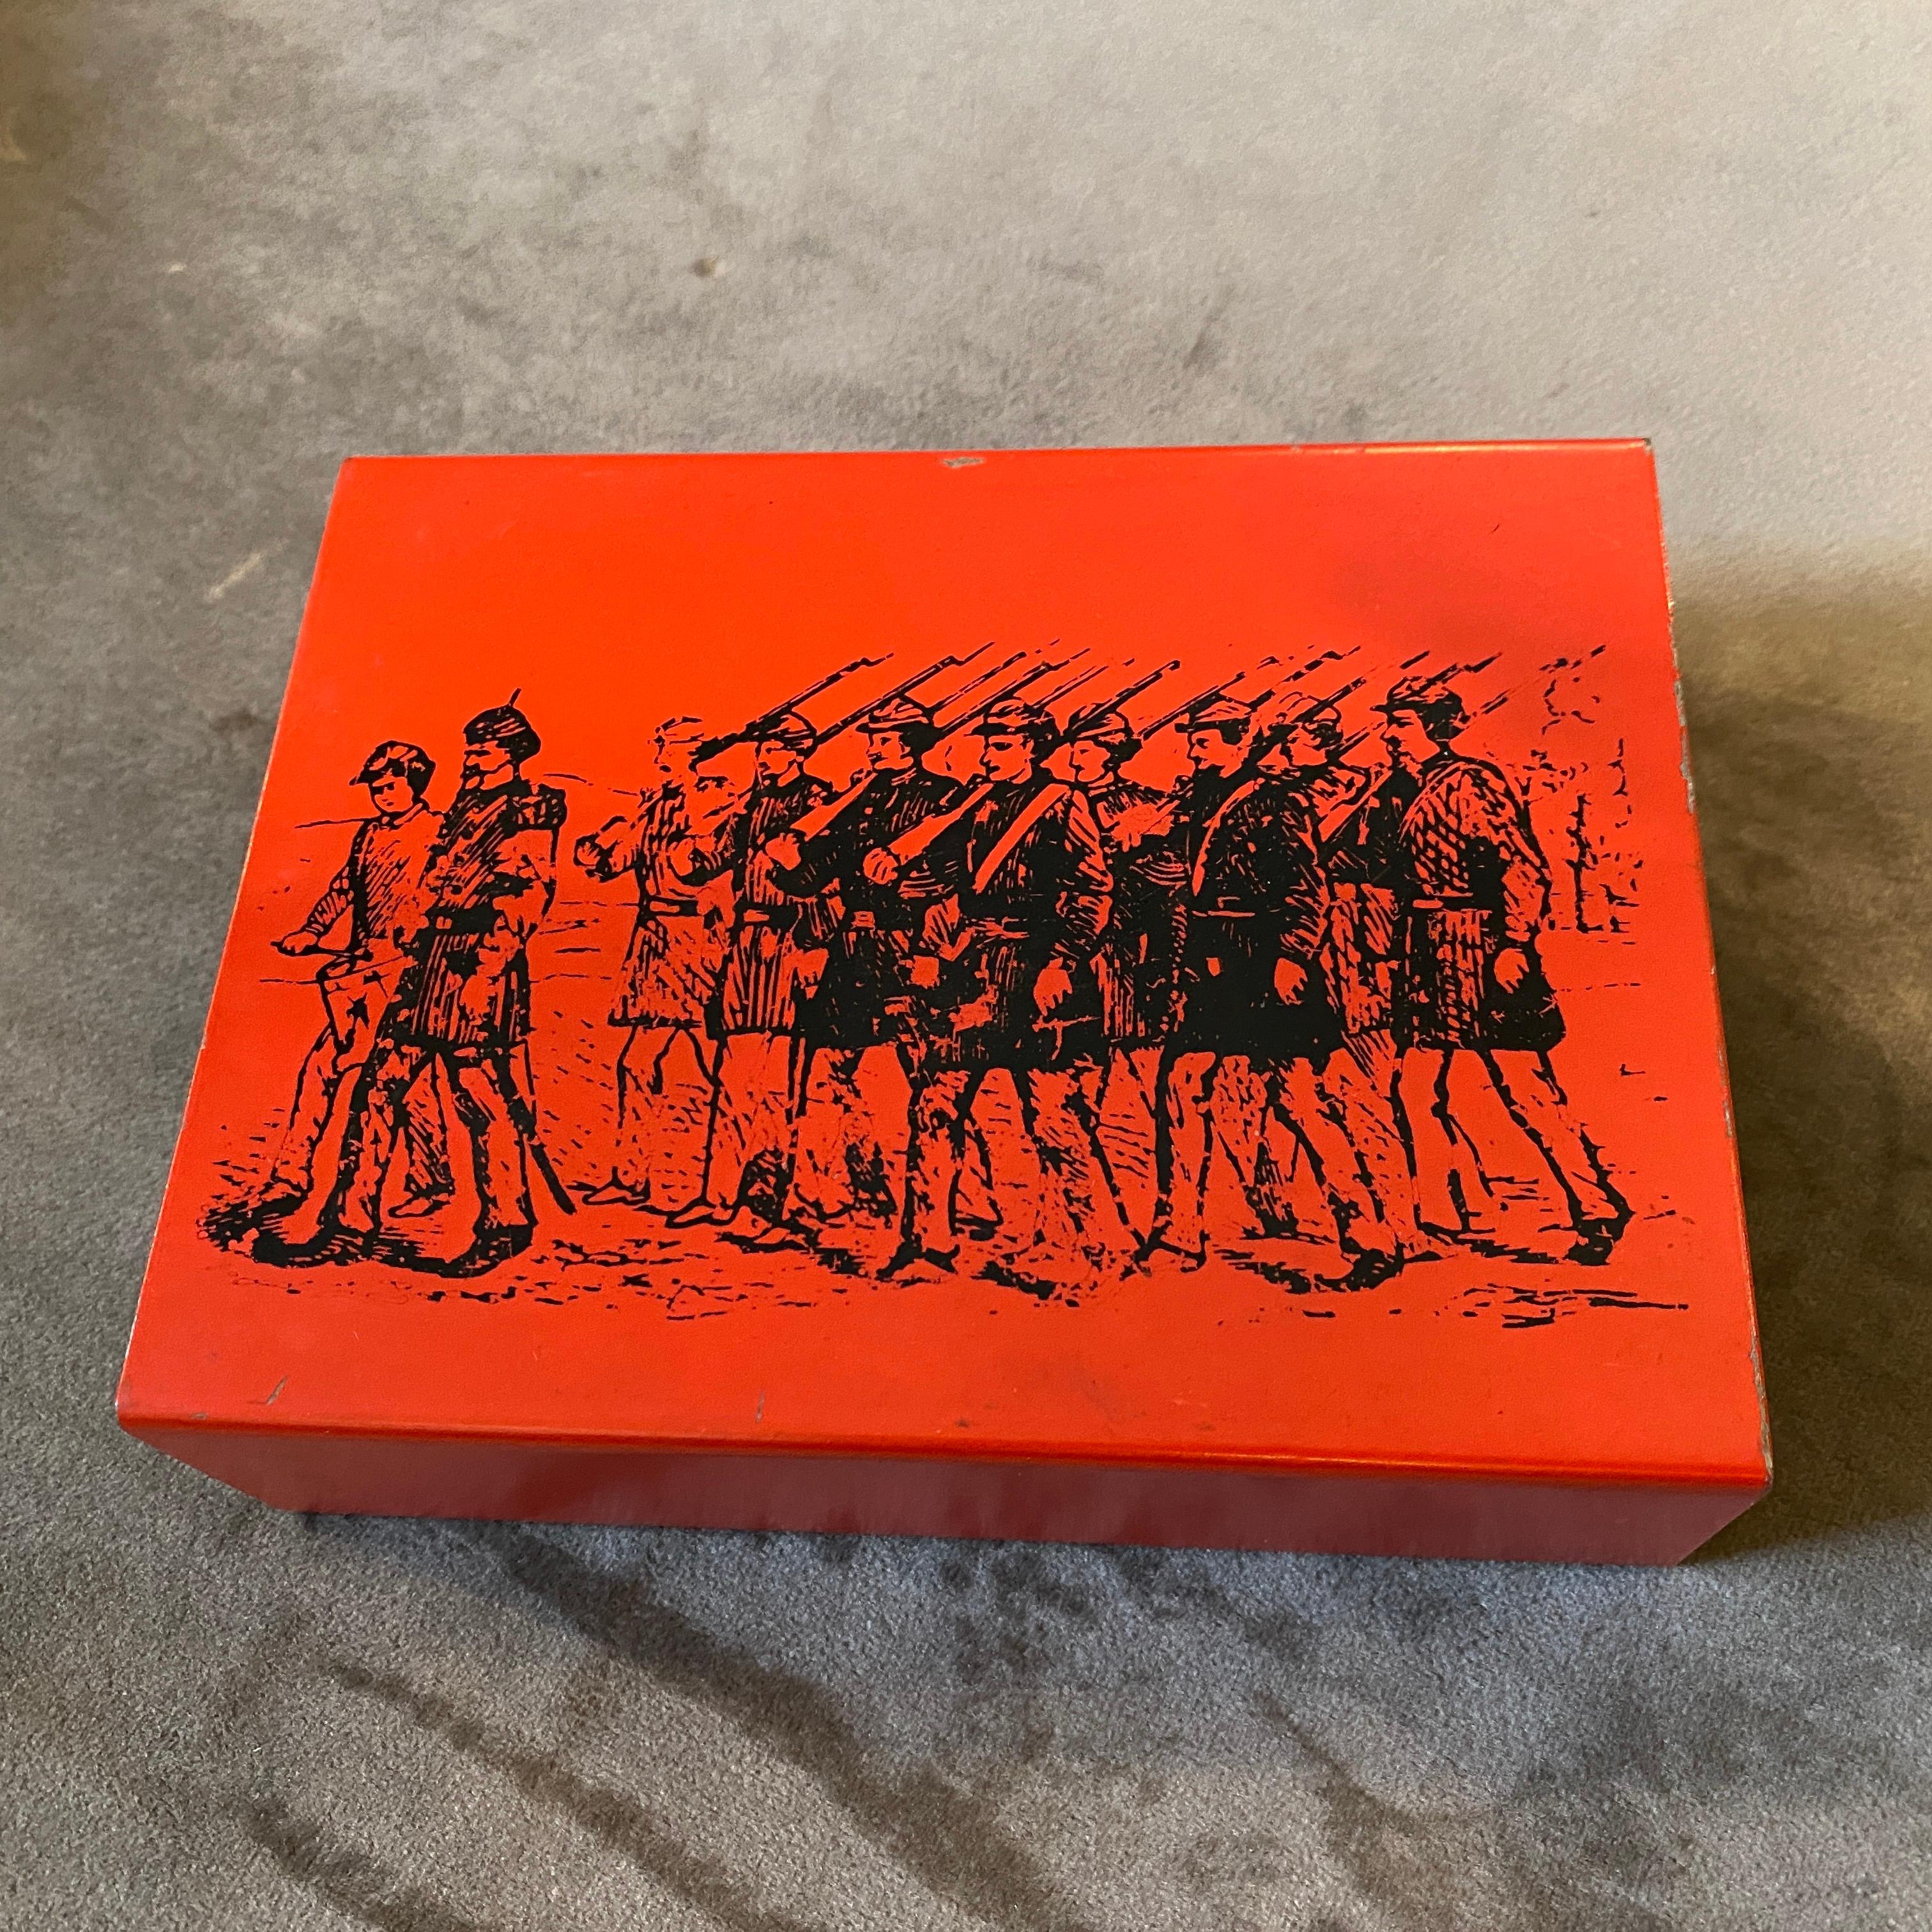 A mahogany and red metal box with black decor depicting soldiers. It's designed by Piero Fornasetti and manufactured by Atelier Fornasetti. The Cigarette Box is a highly collectible and distinctive piece that showcases the iconic style of Piero